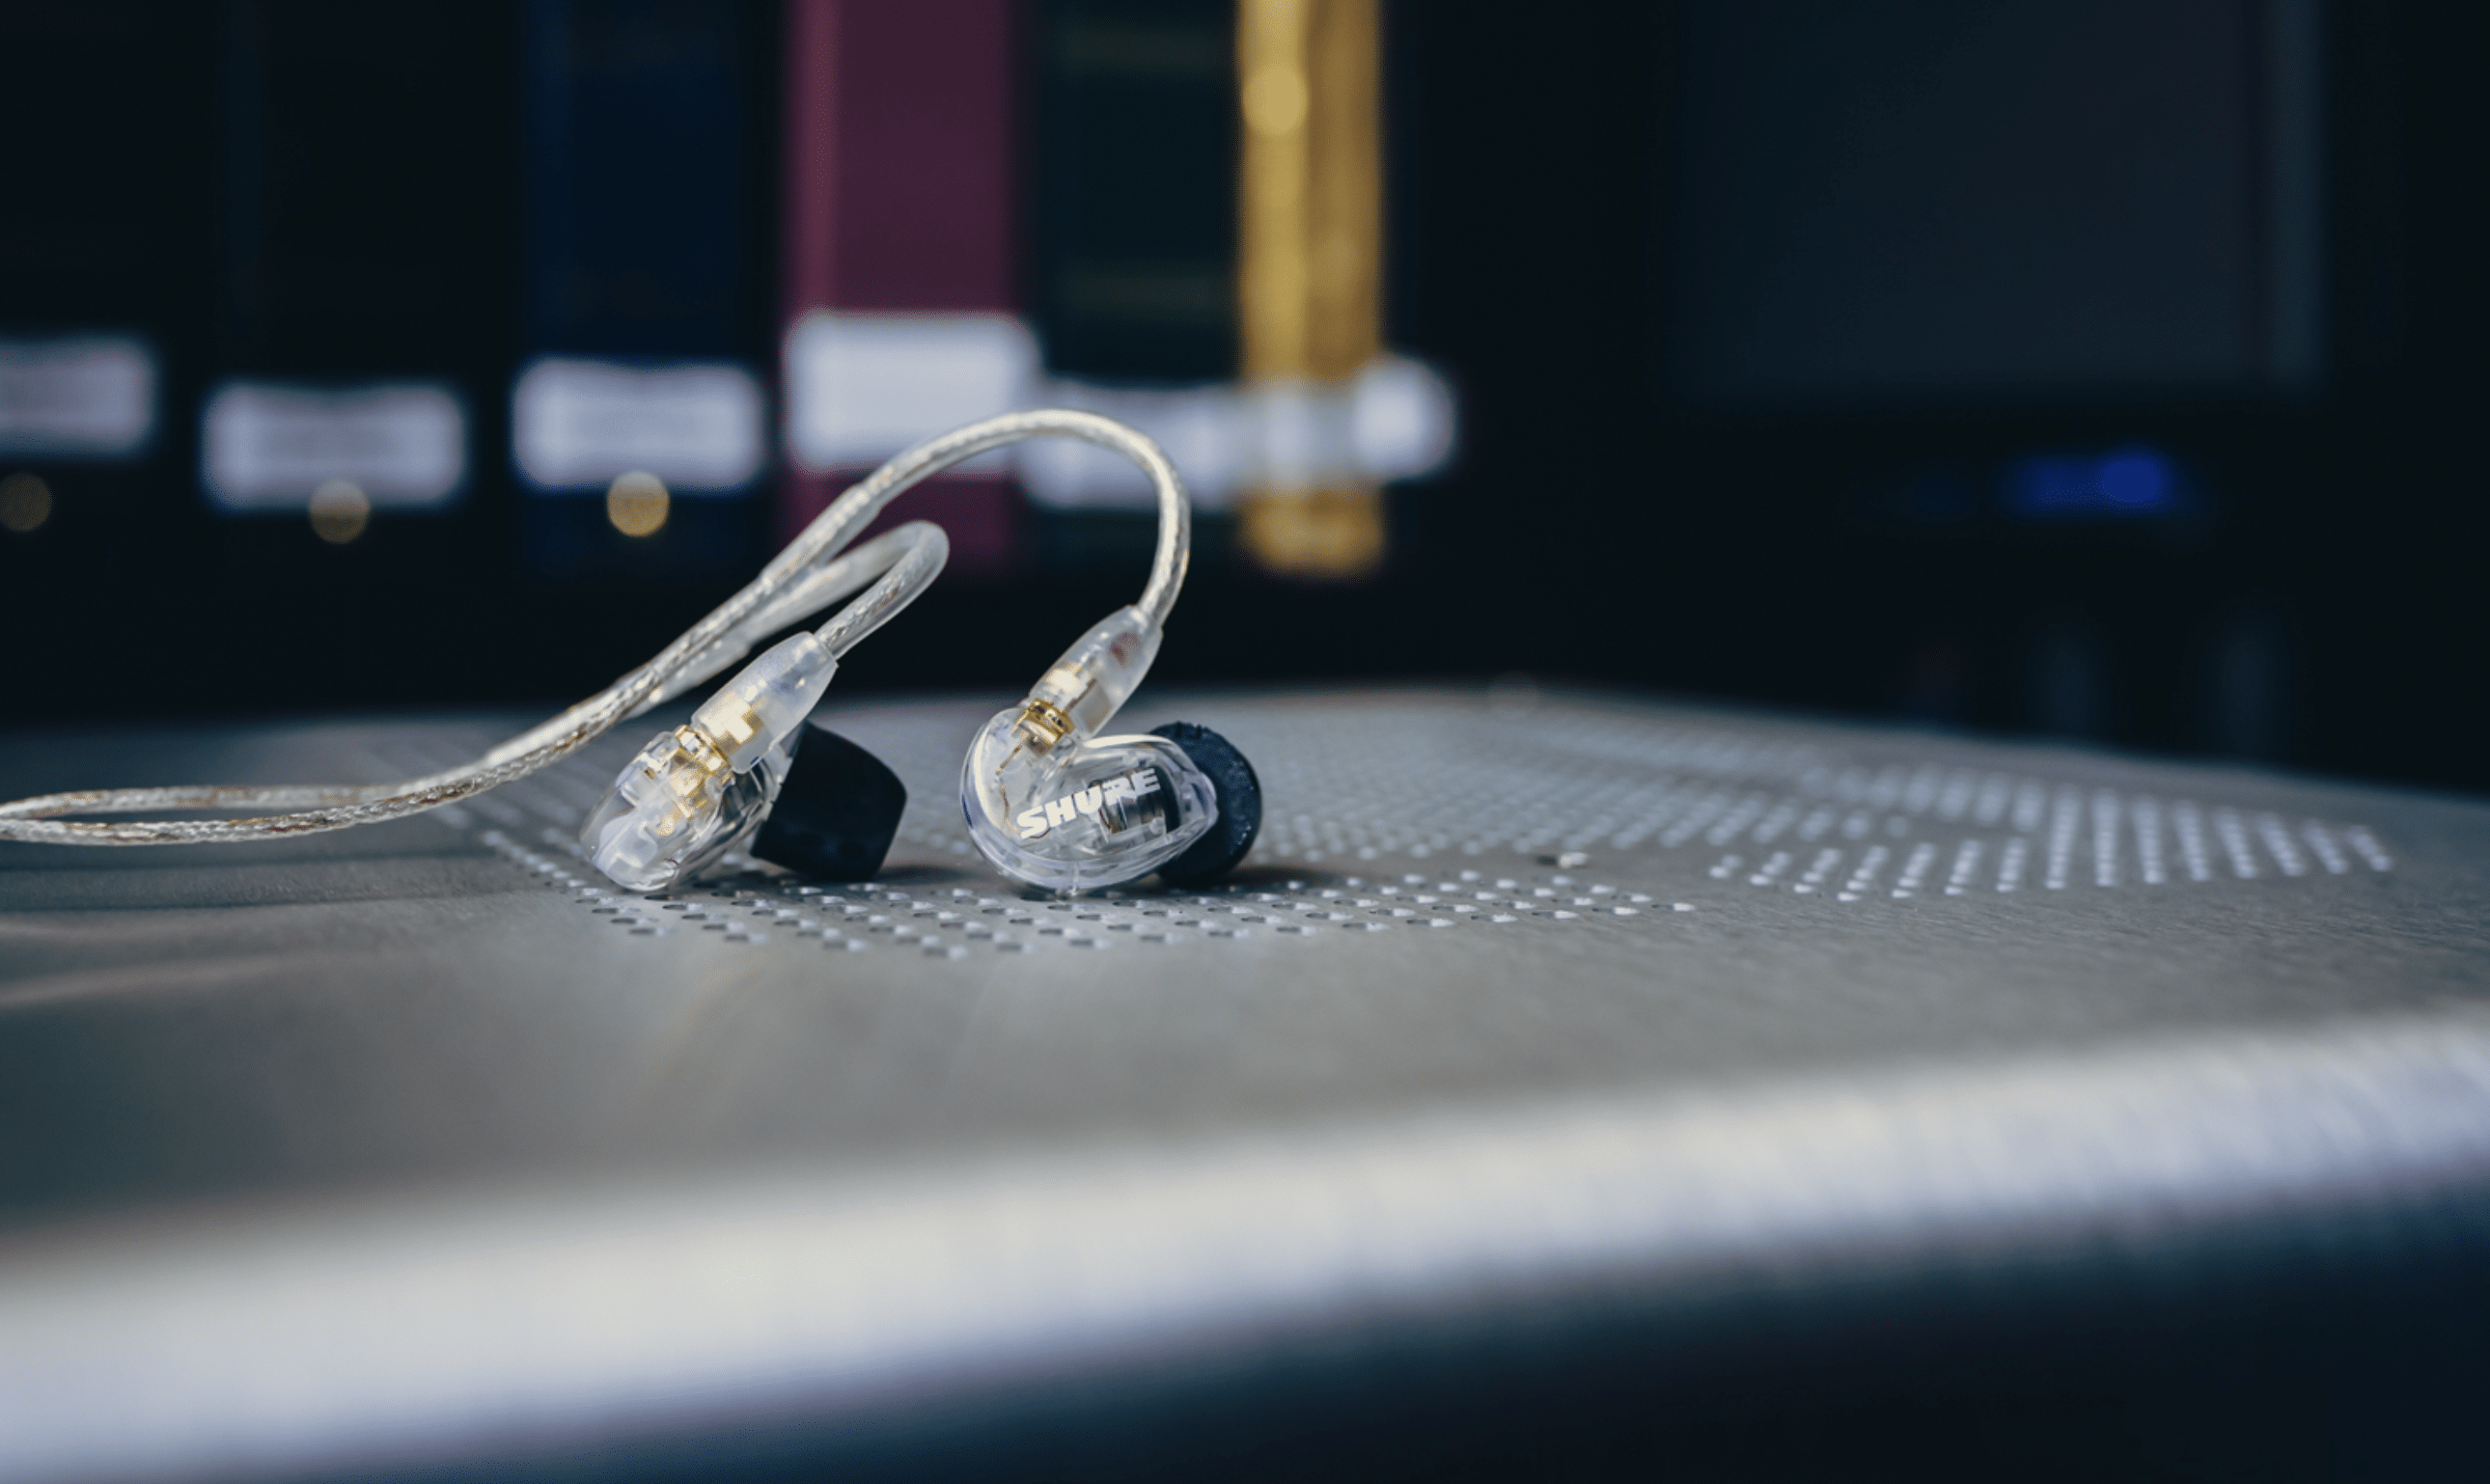 Shure SE215 Review: Are These the Best Earphones for Sound Quality?